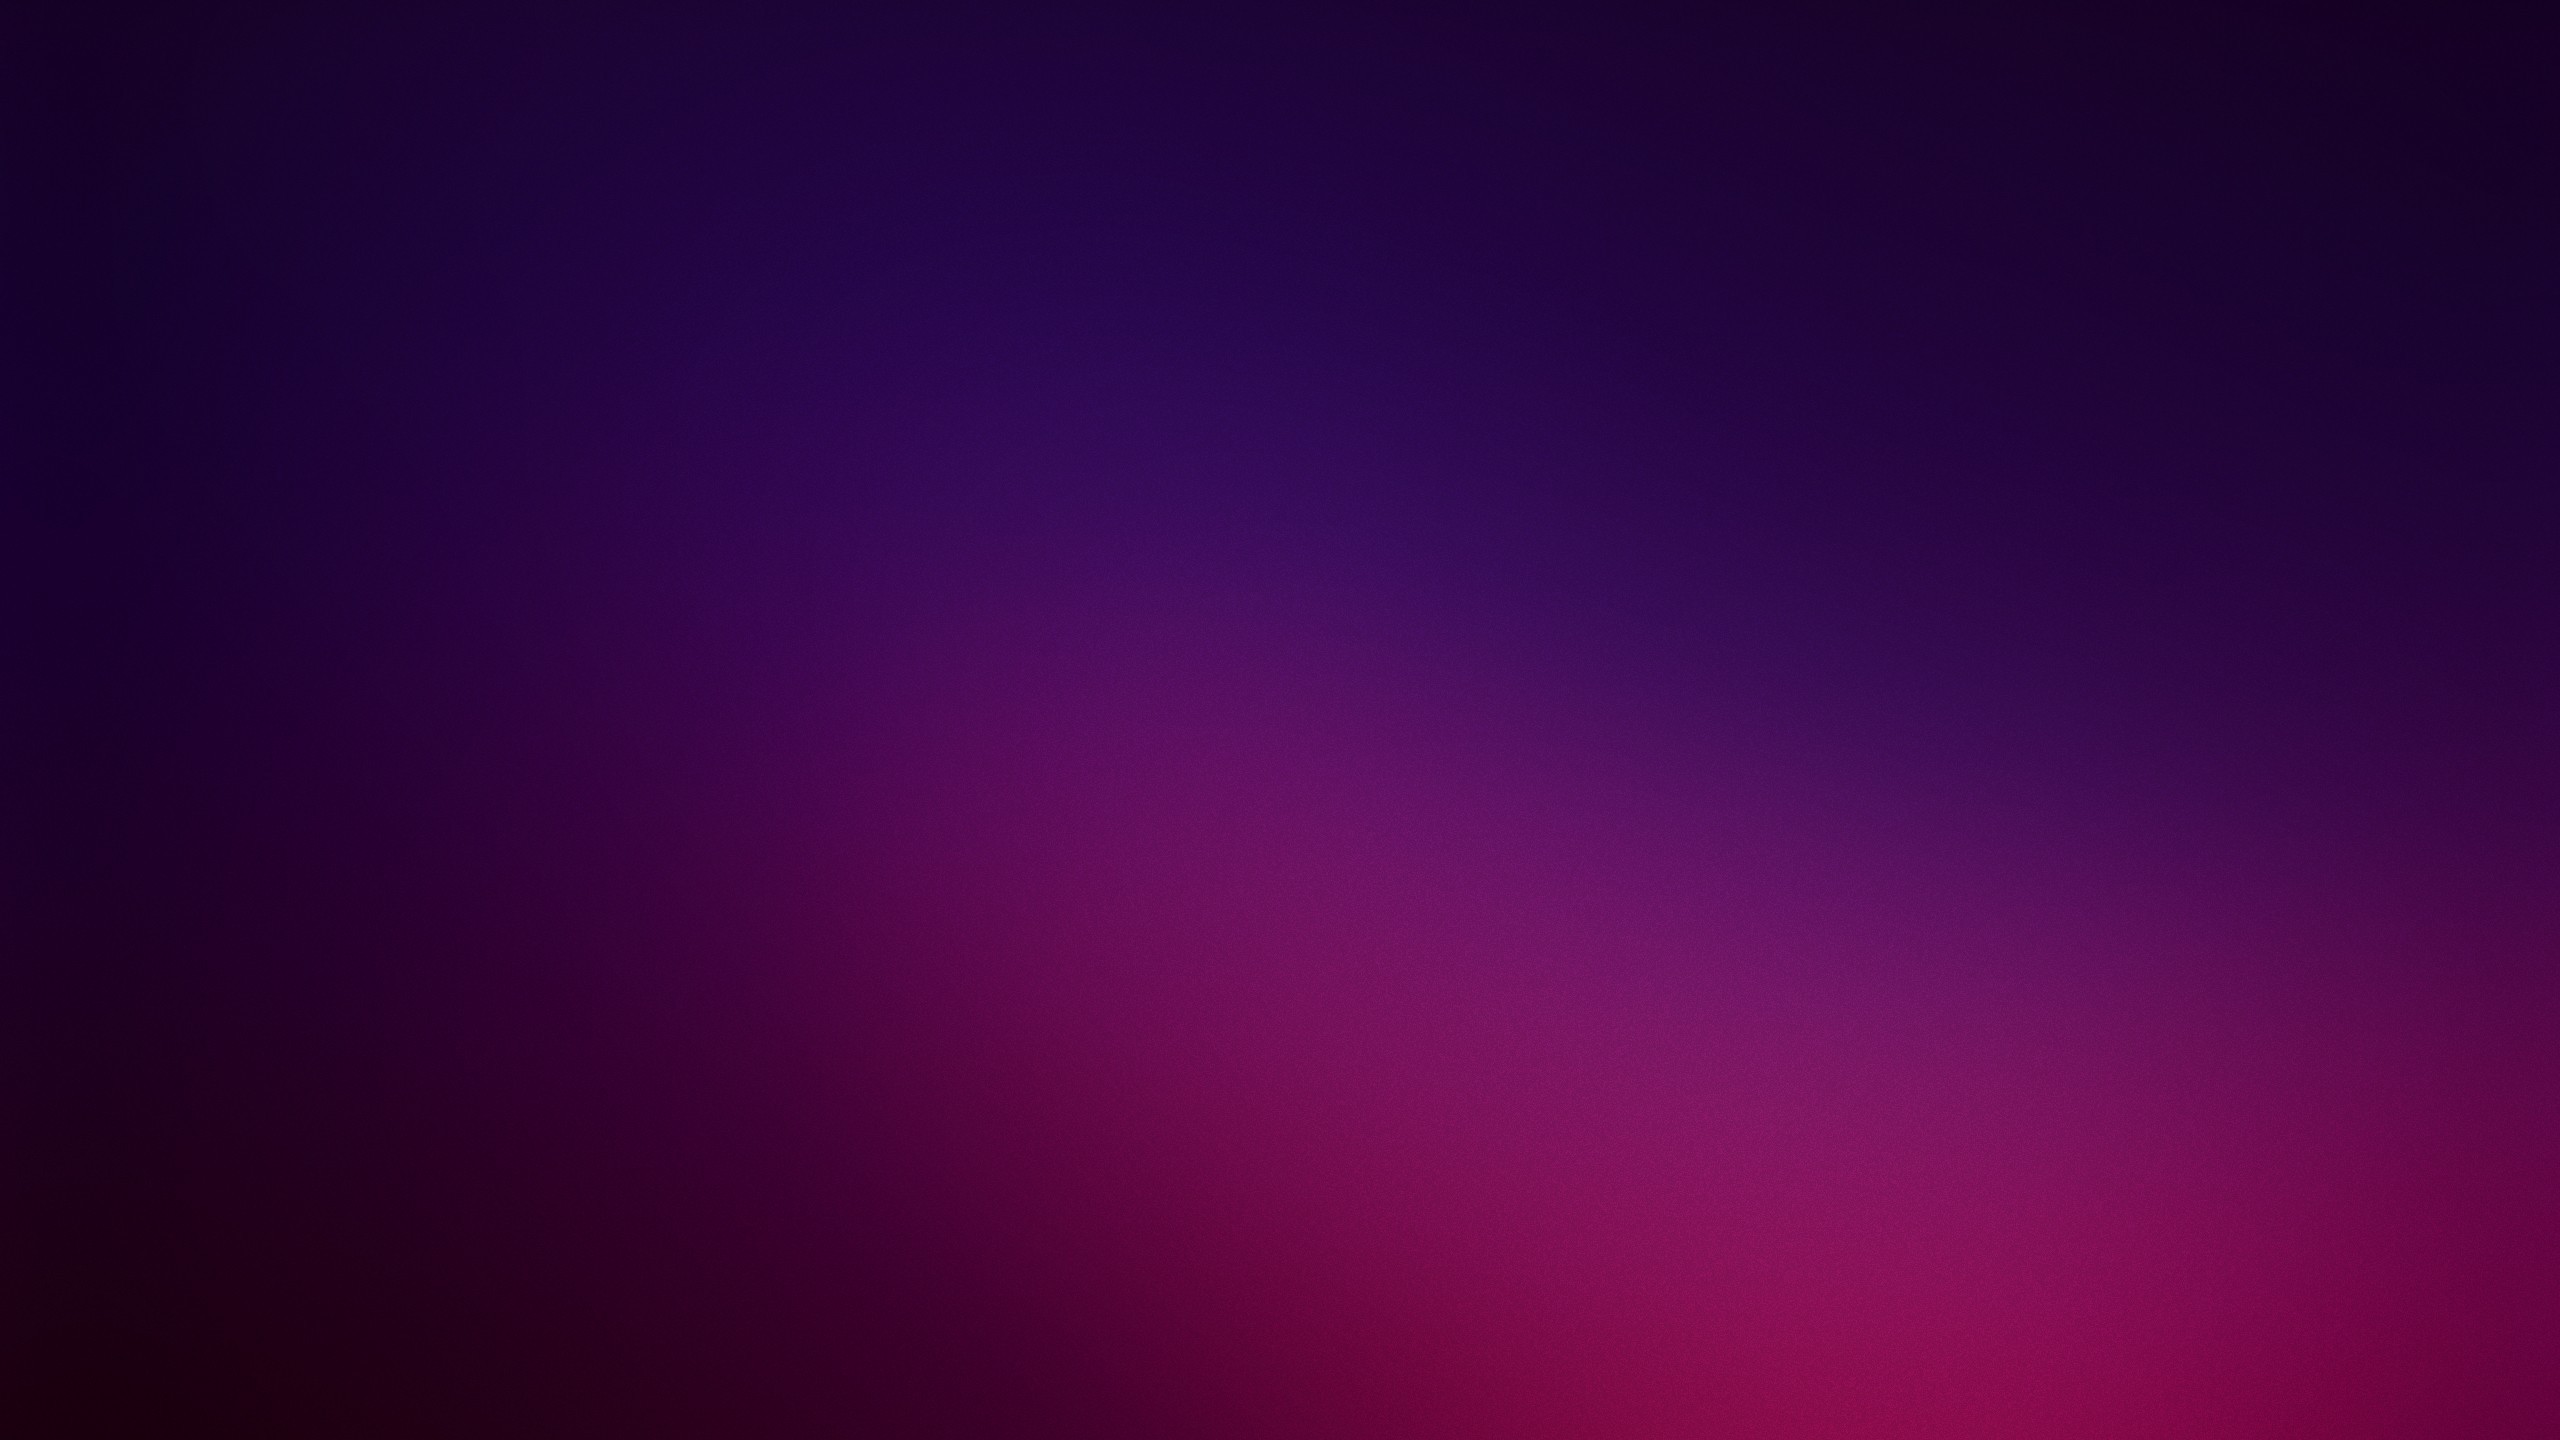 2560x1440 Download Wallpaper 1920x1080 Background, Cell, Solid, Color, Line .